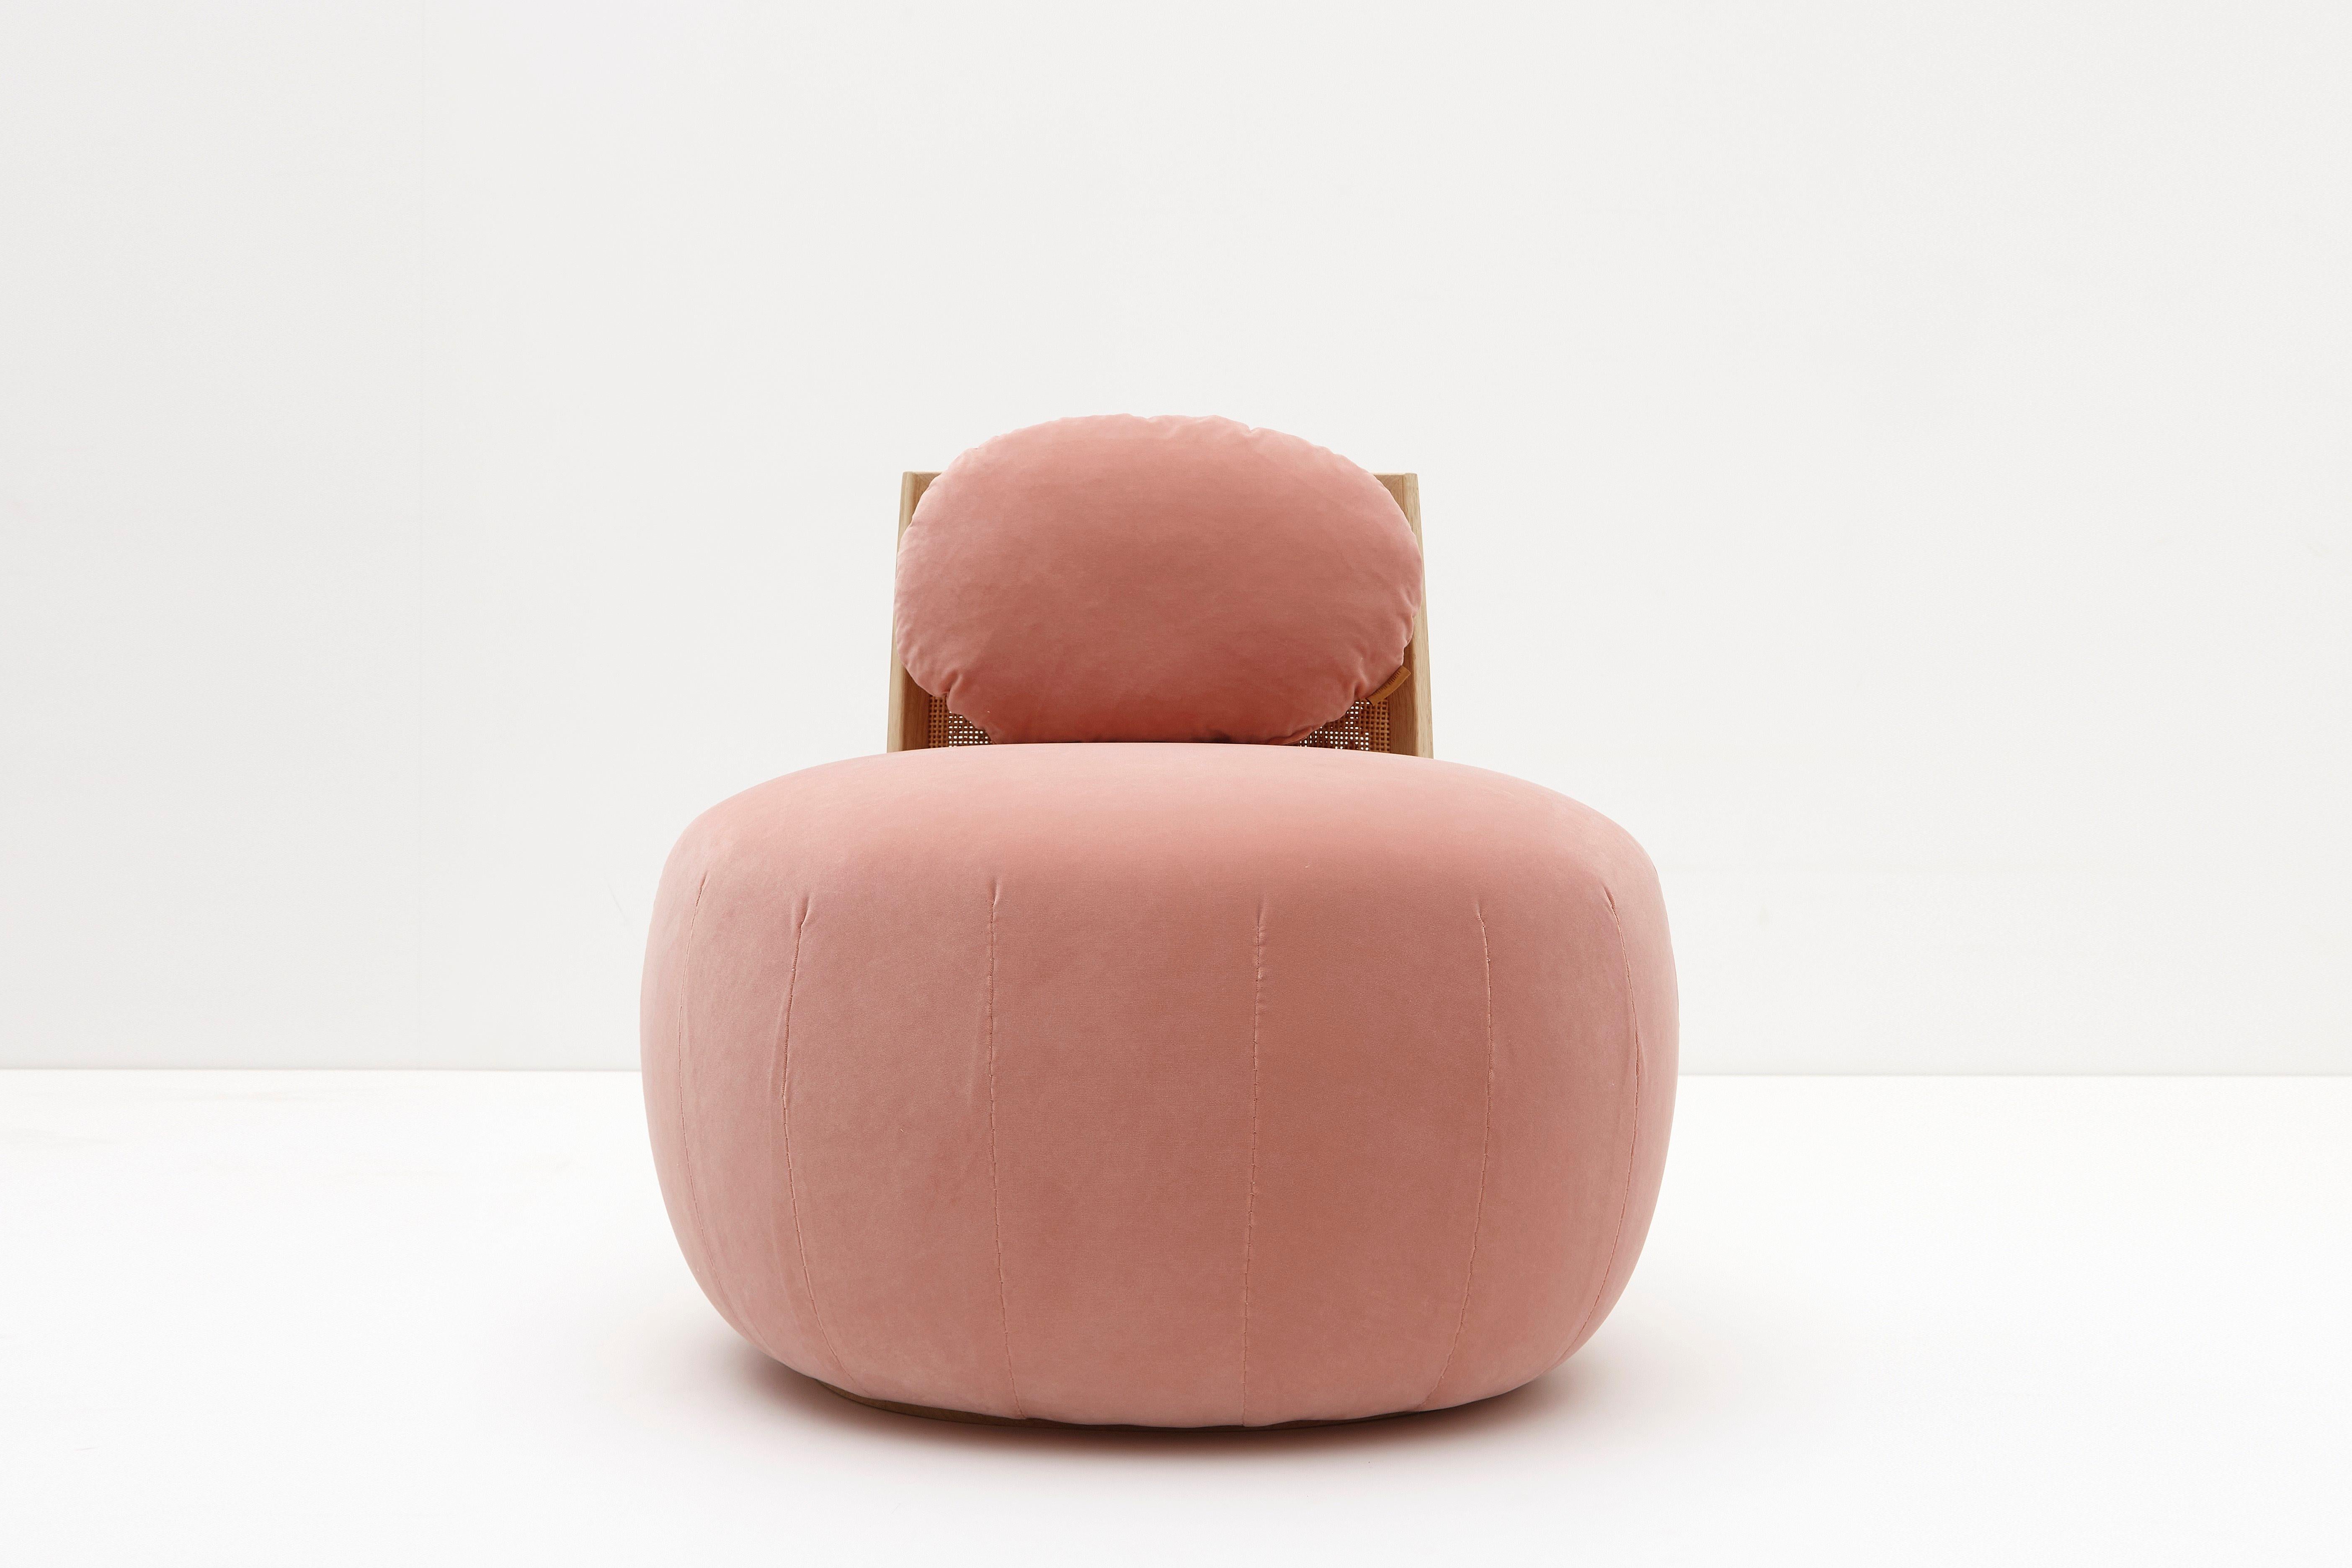 This unique piece is part of the 'Stitched Horizons’ collection of five pebble chairs designed by much-acclaimed designer in the Near and Middle East Nada Debs, renowned for cleverly distilling culture and craftsmanship in works imbued with